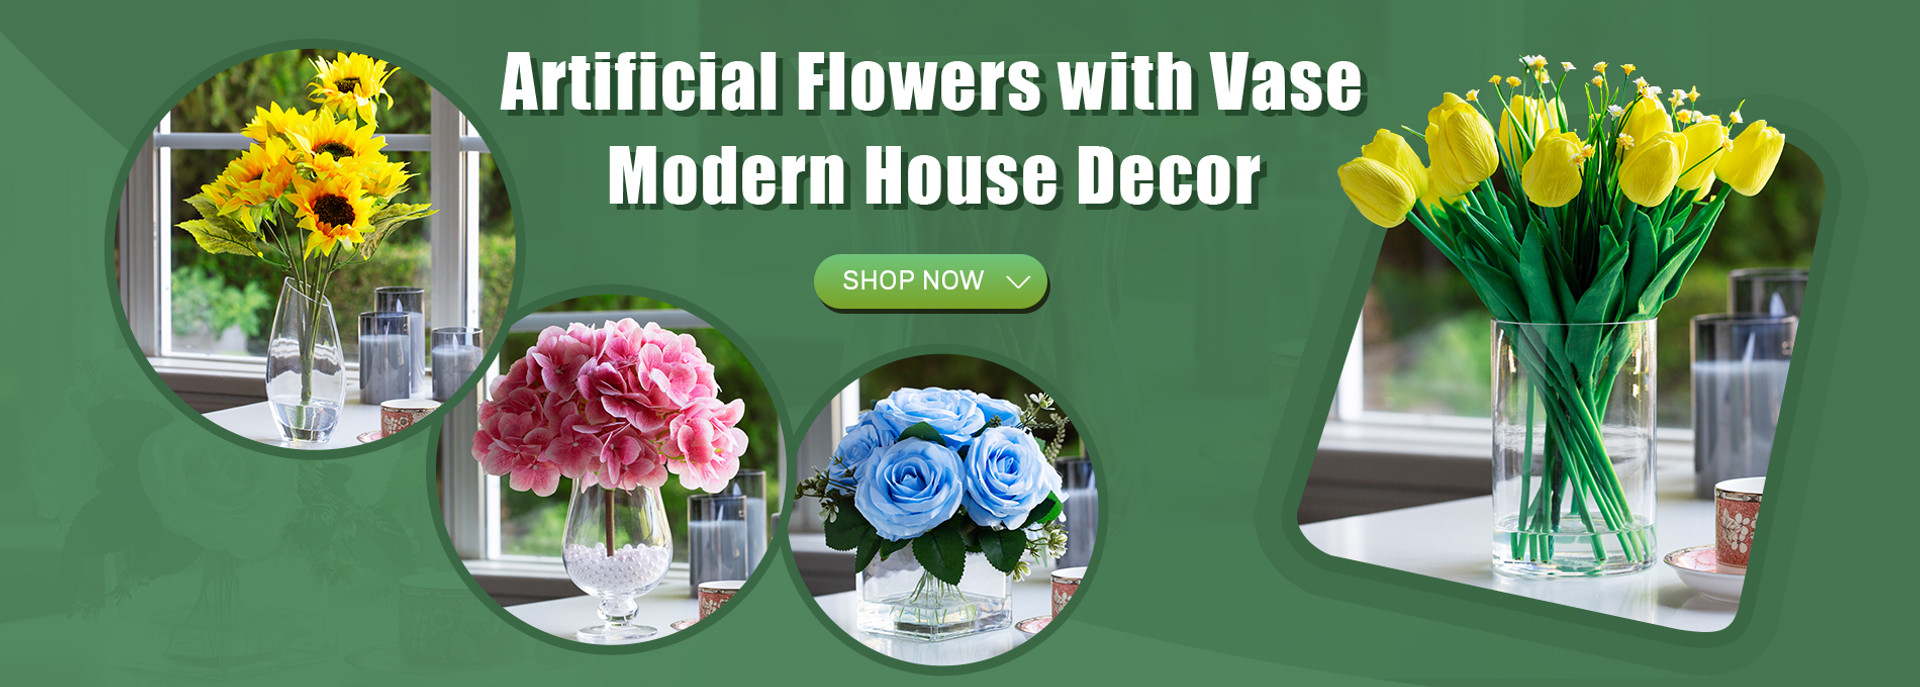 ENOVA FLORAL 18 Heads Artificial Tulips Flowers Real Touch in Vase, Mixed  Fake Baby Breath Artificial Flowers in Vase with Faux Water for Dining